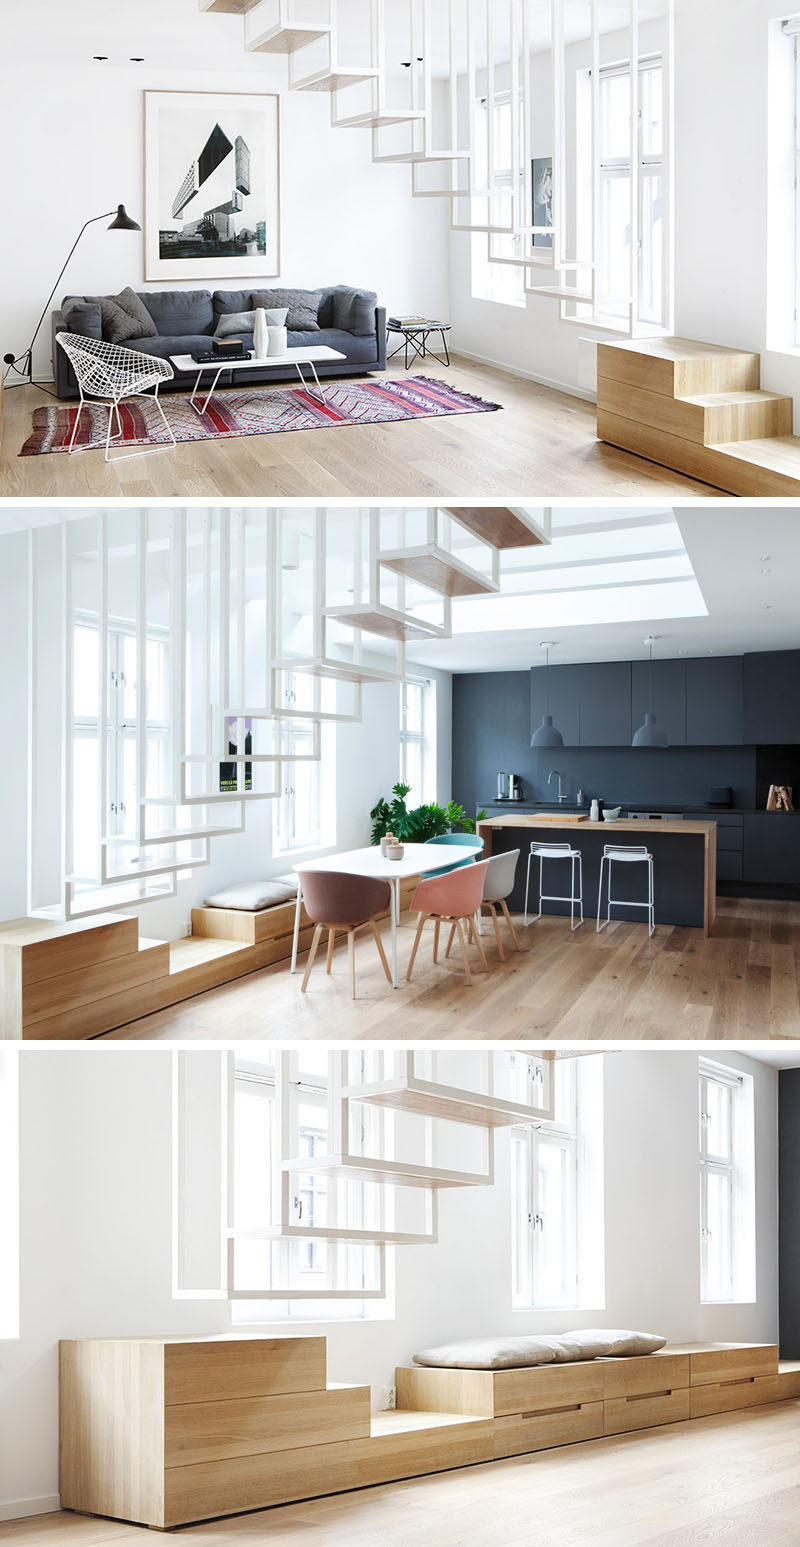 13 Steep Stairs ideas  stairs, house stairs, loft stairs